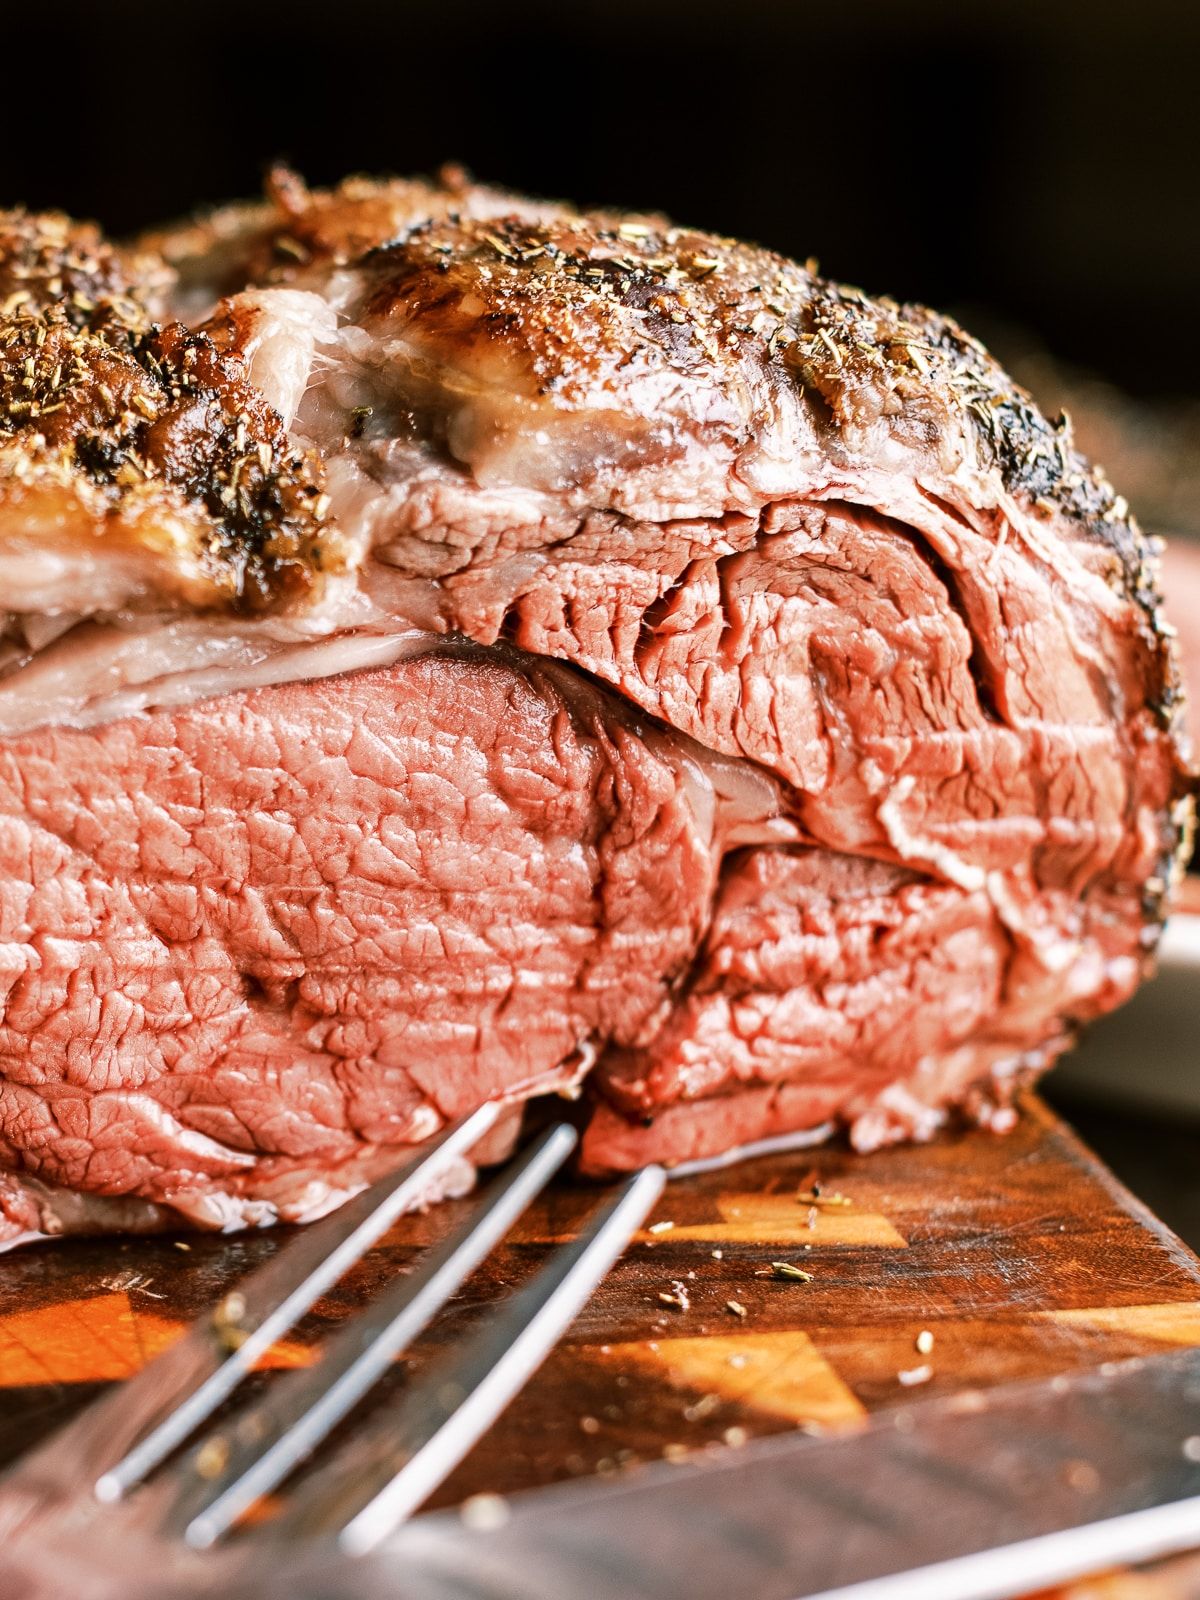 Prime Rib Cooking Temperatures: Tips For Perfect Roasts - Bake It With Love